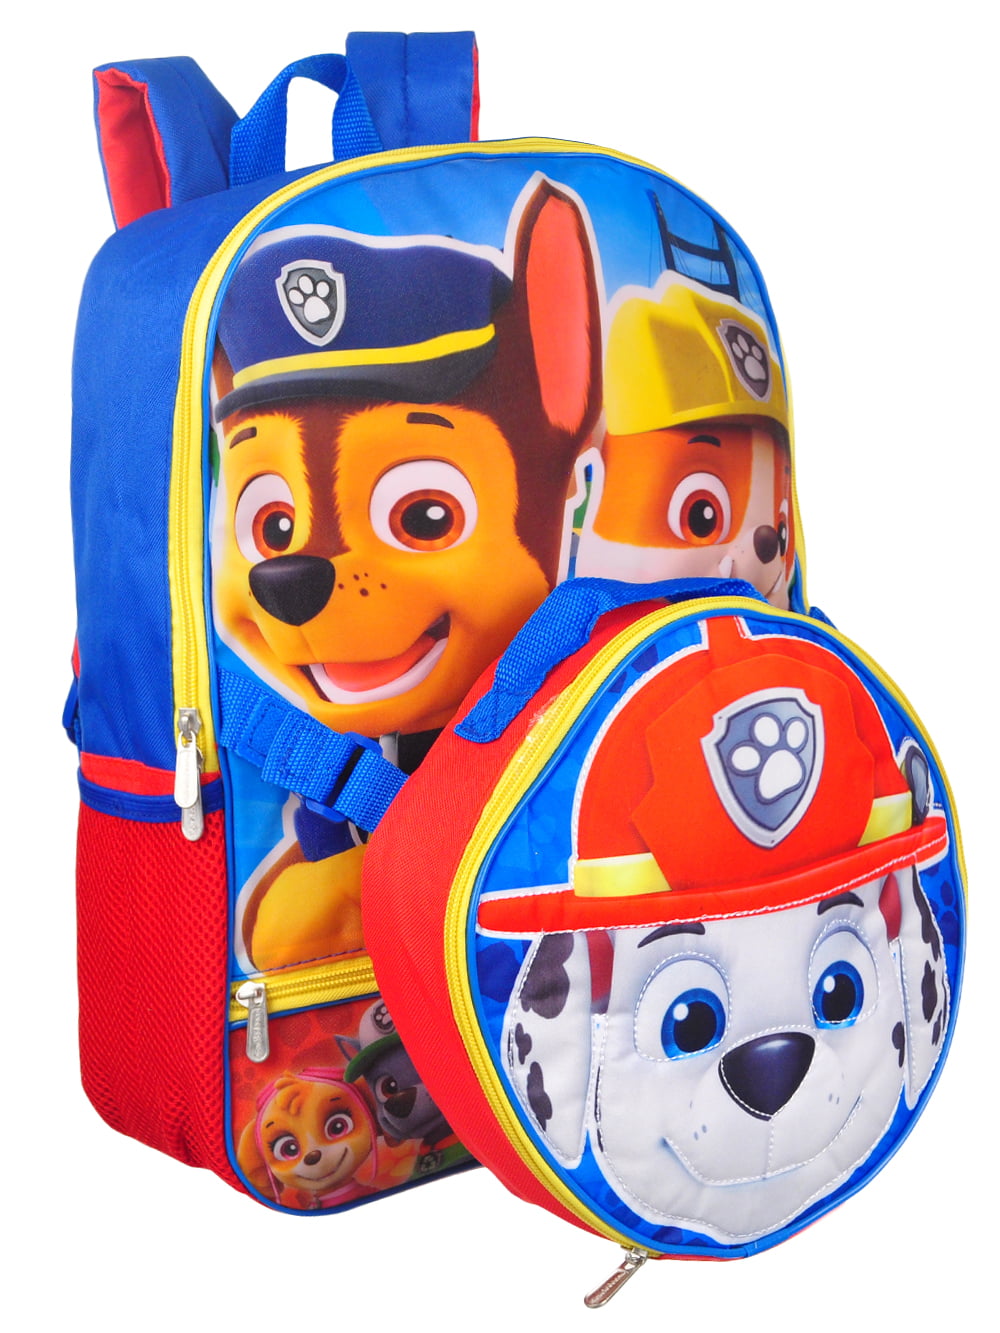 Paw Patrol Backpack with Insulated Lunchbox - blue, one size - Walmart.com